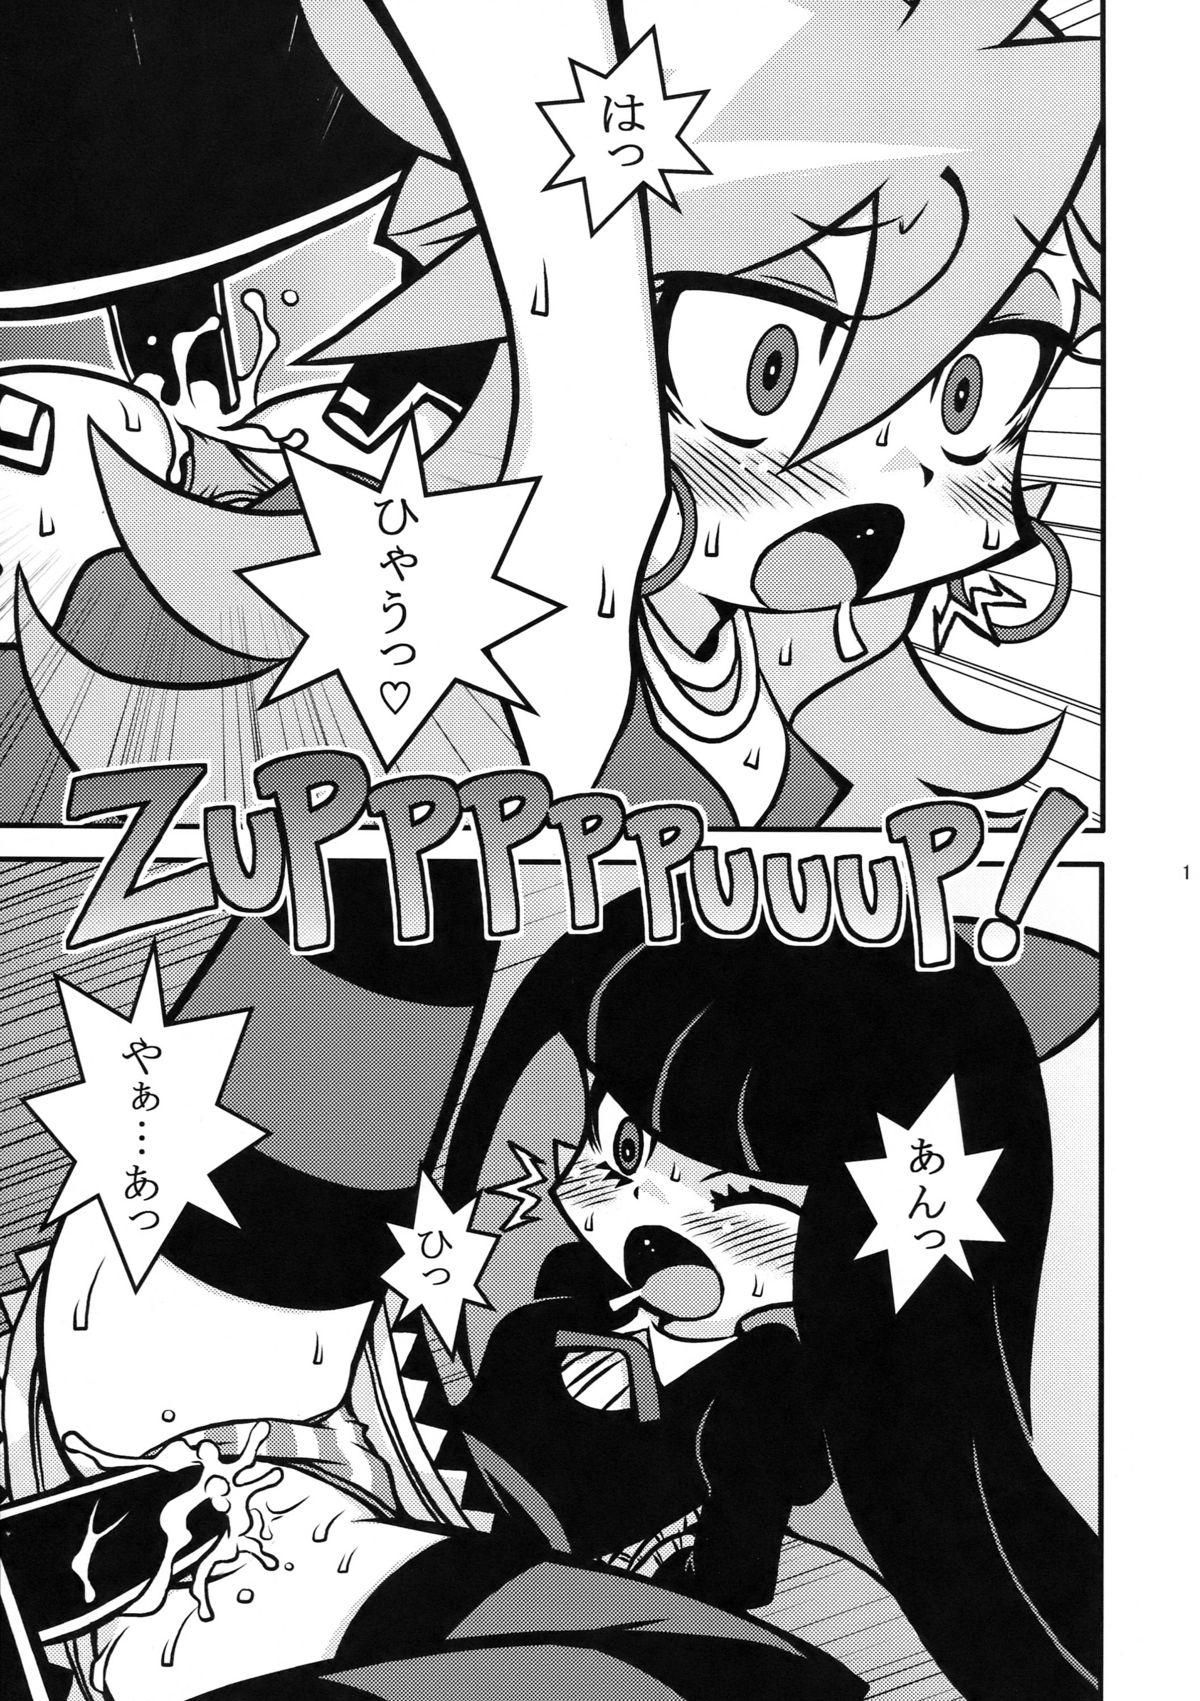 Office Sex R18 - Panty and stocking with garterbelt Freeporn - Page 11